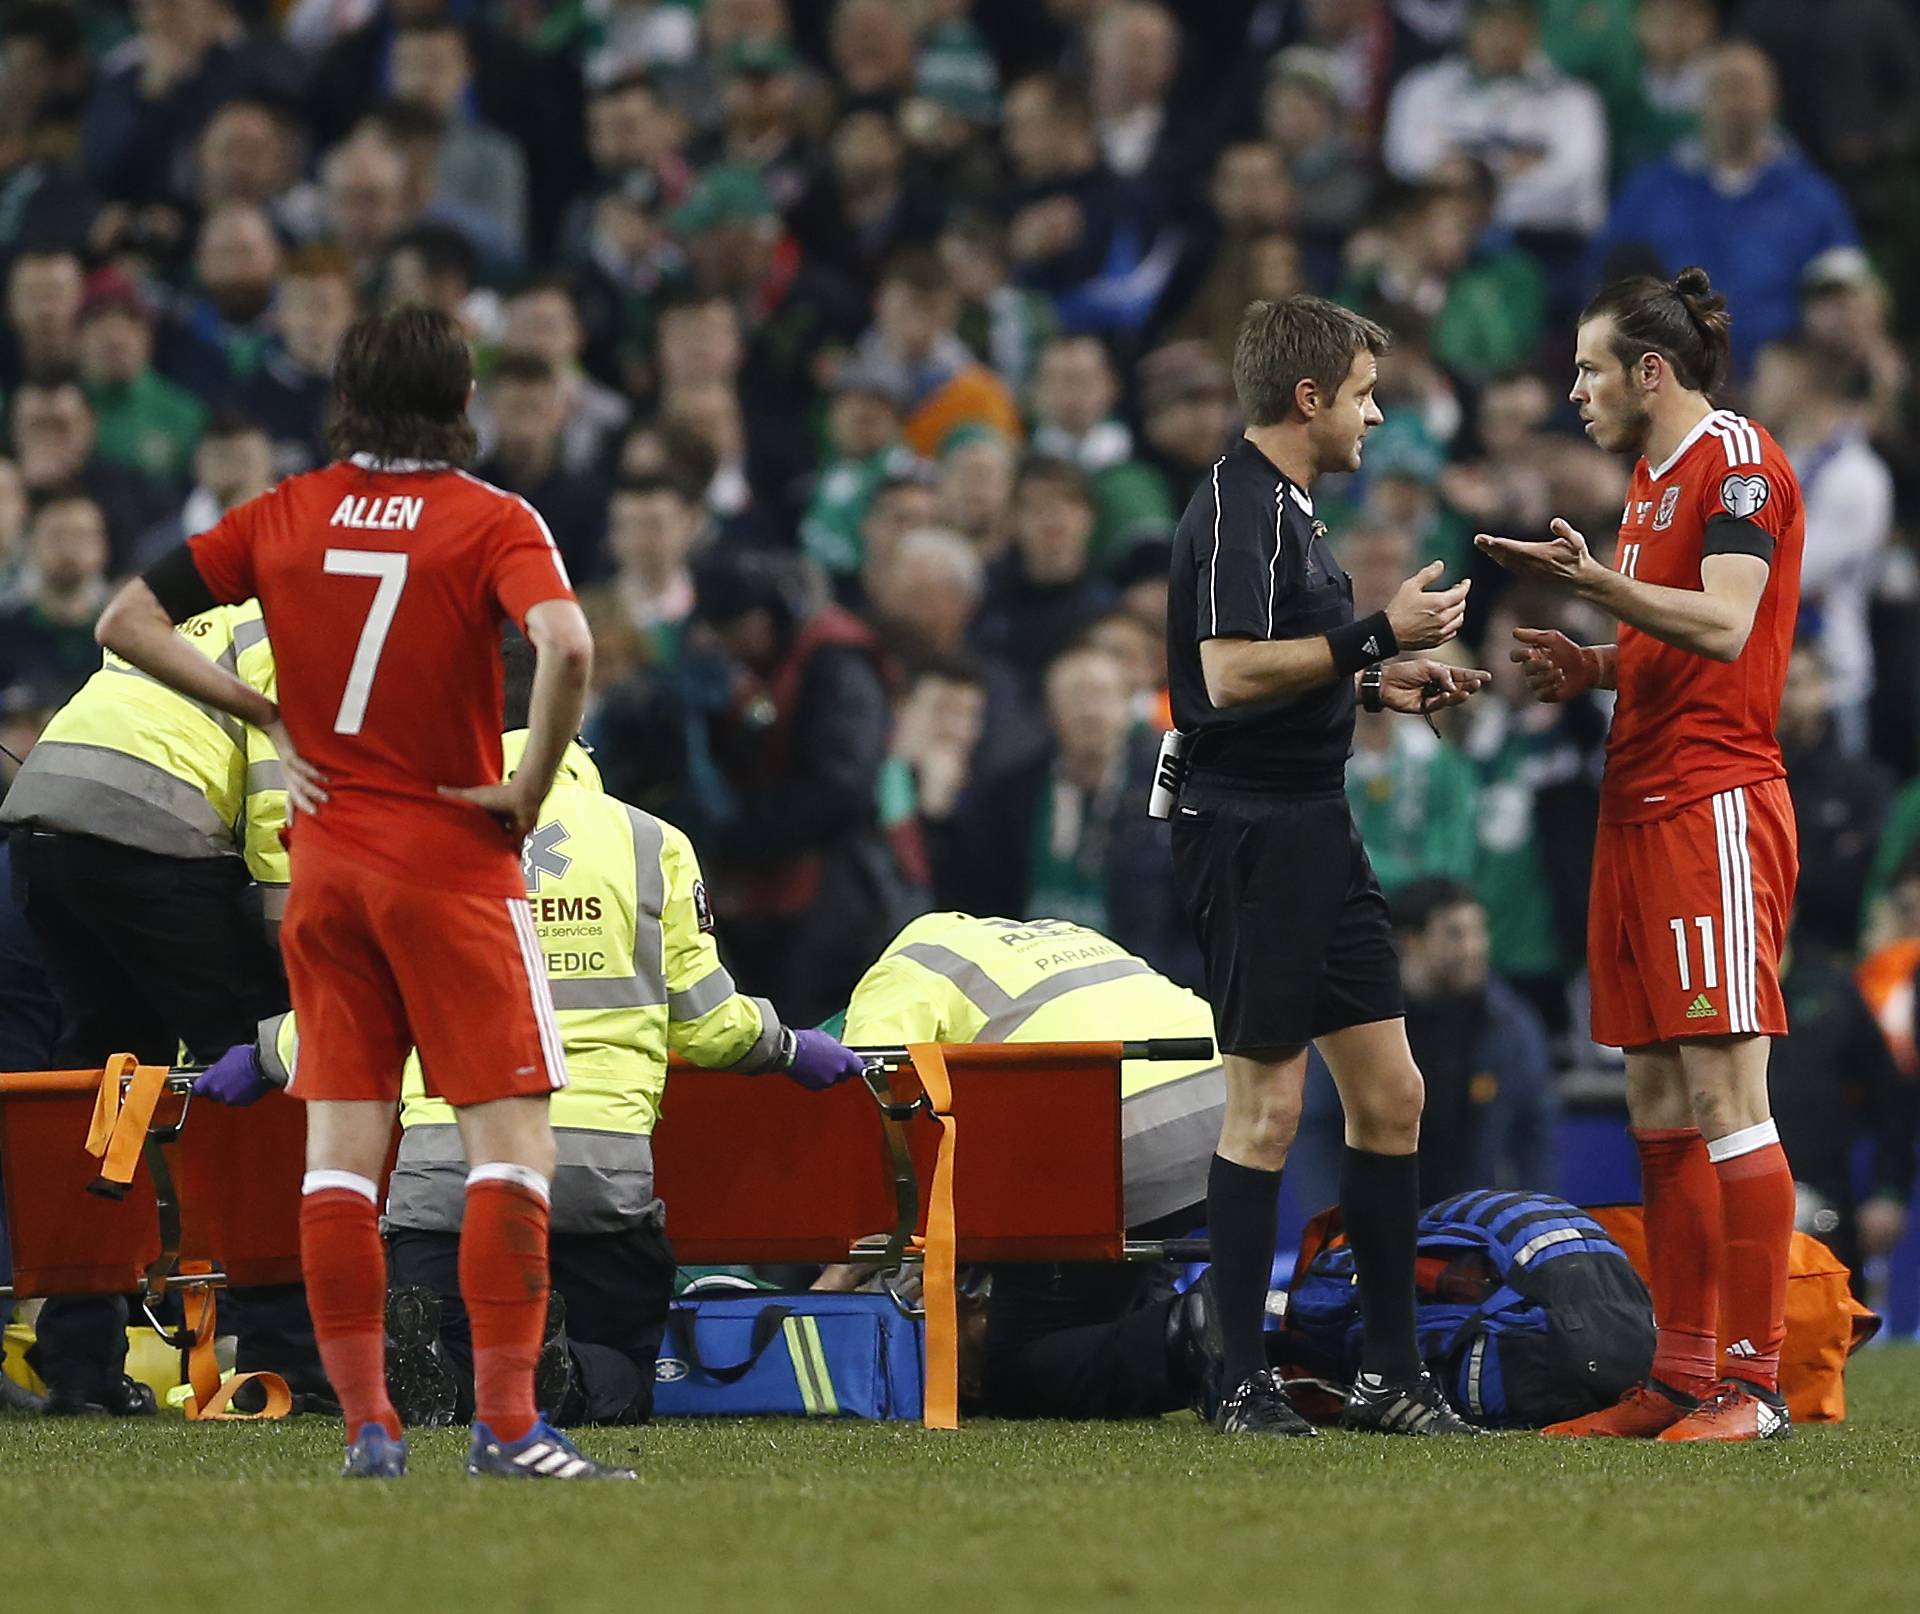 Republic of Ireland's Seamus Coleman receives medical attention as Wales' Gareth Bale speals to referee Nicola Rizzoli